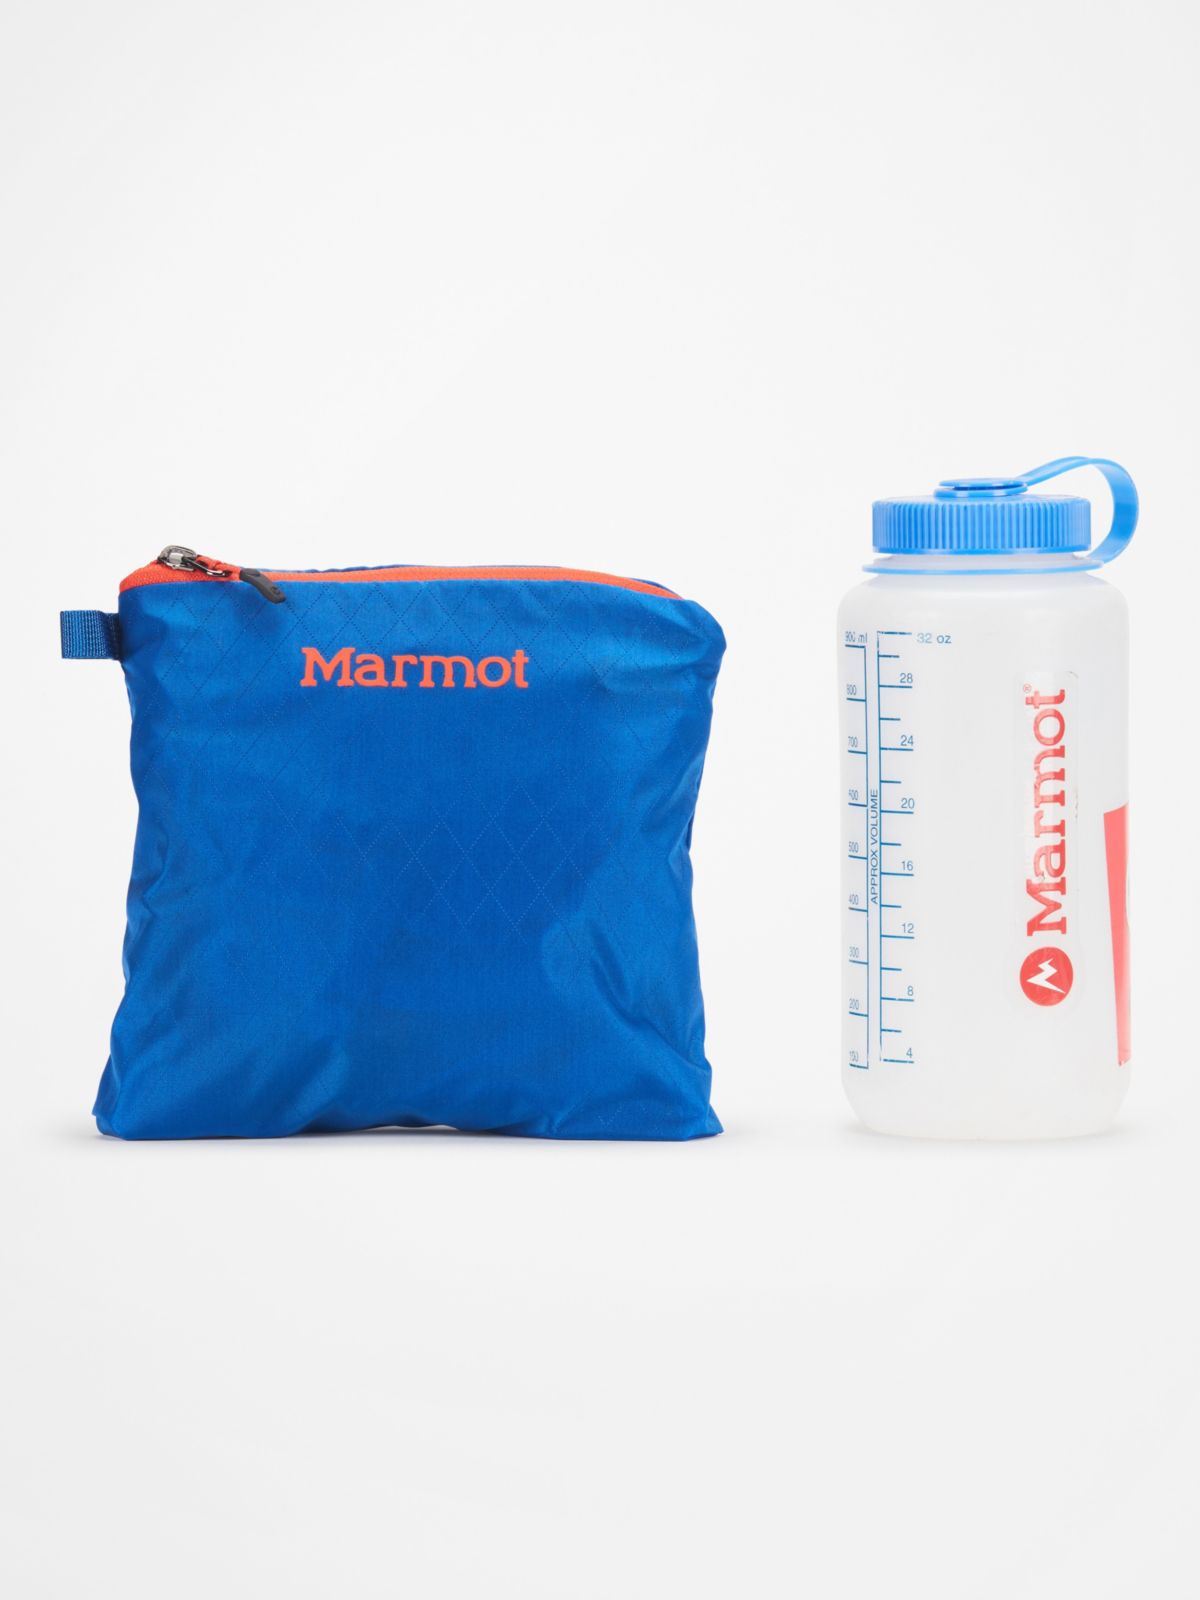 carry bag and water bottle